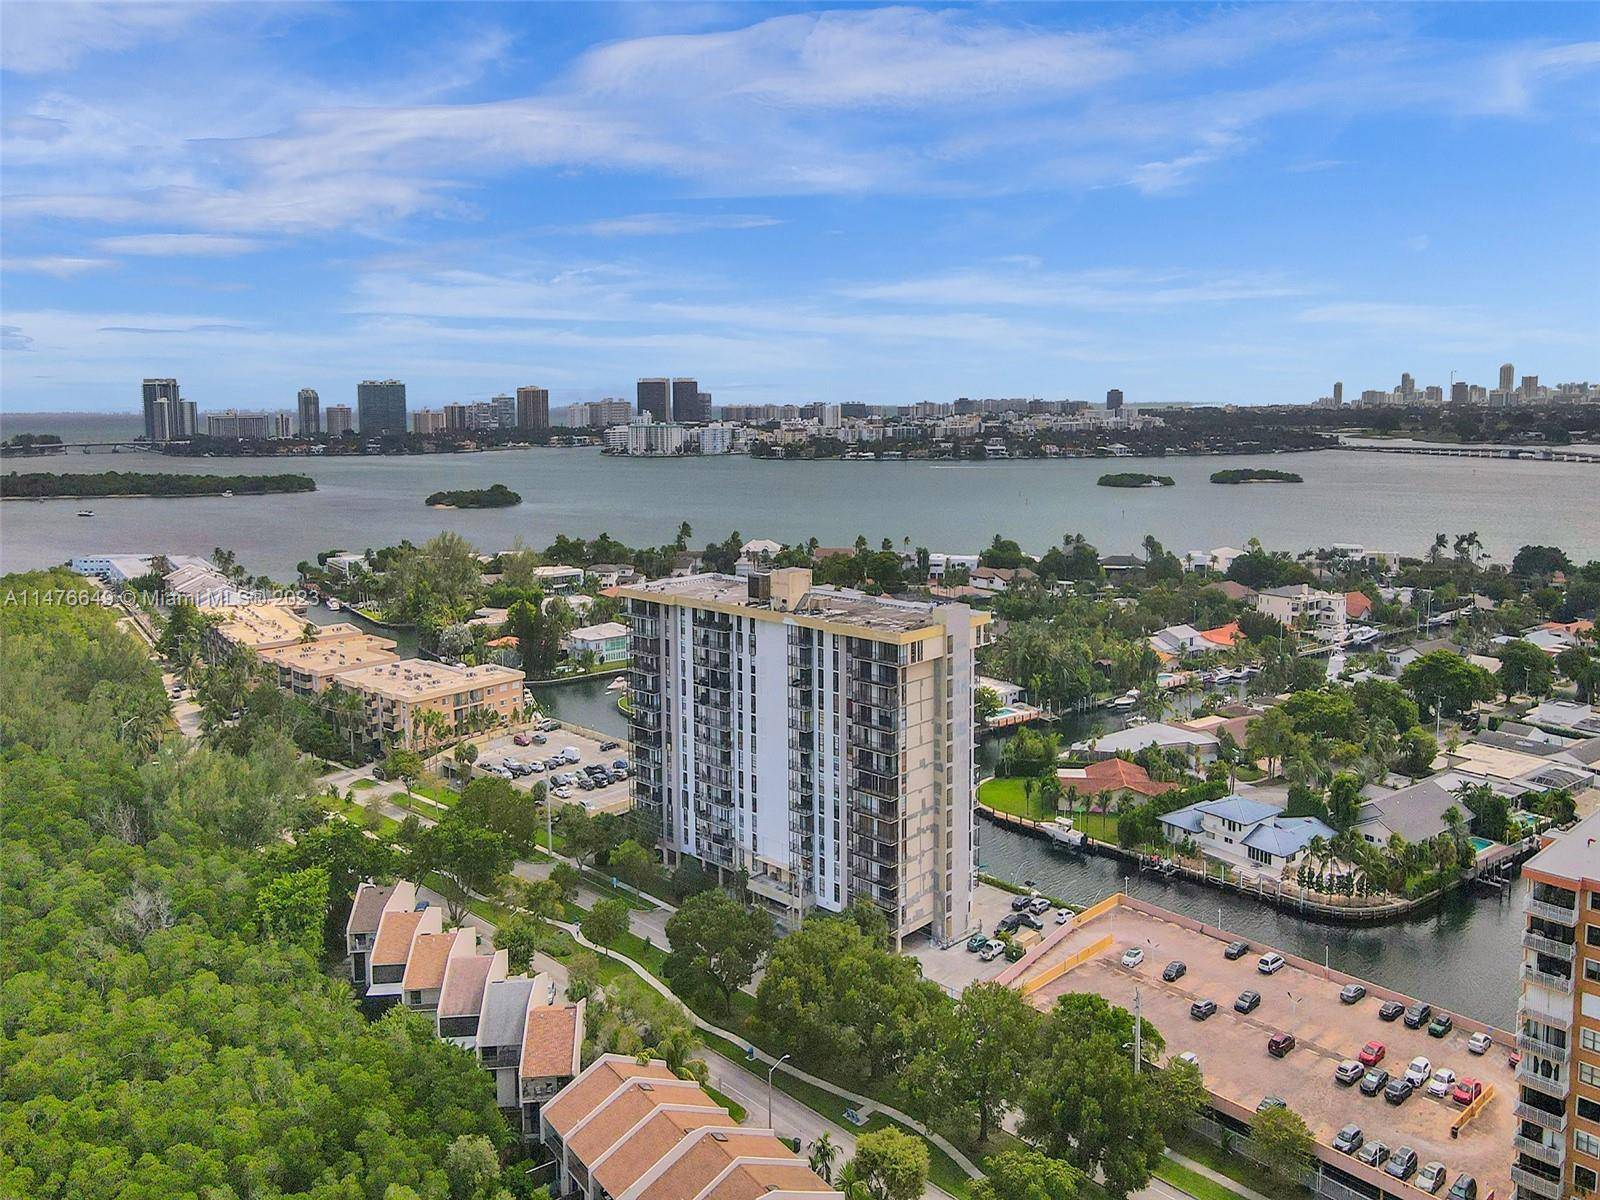 Welcome to this stunning fully updated corner unit penthouse in vibrant North Miami.